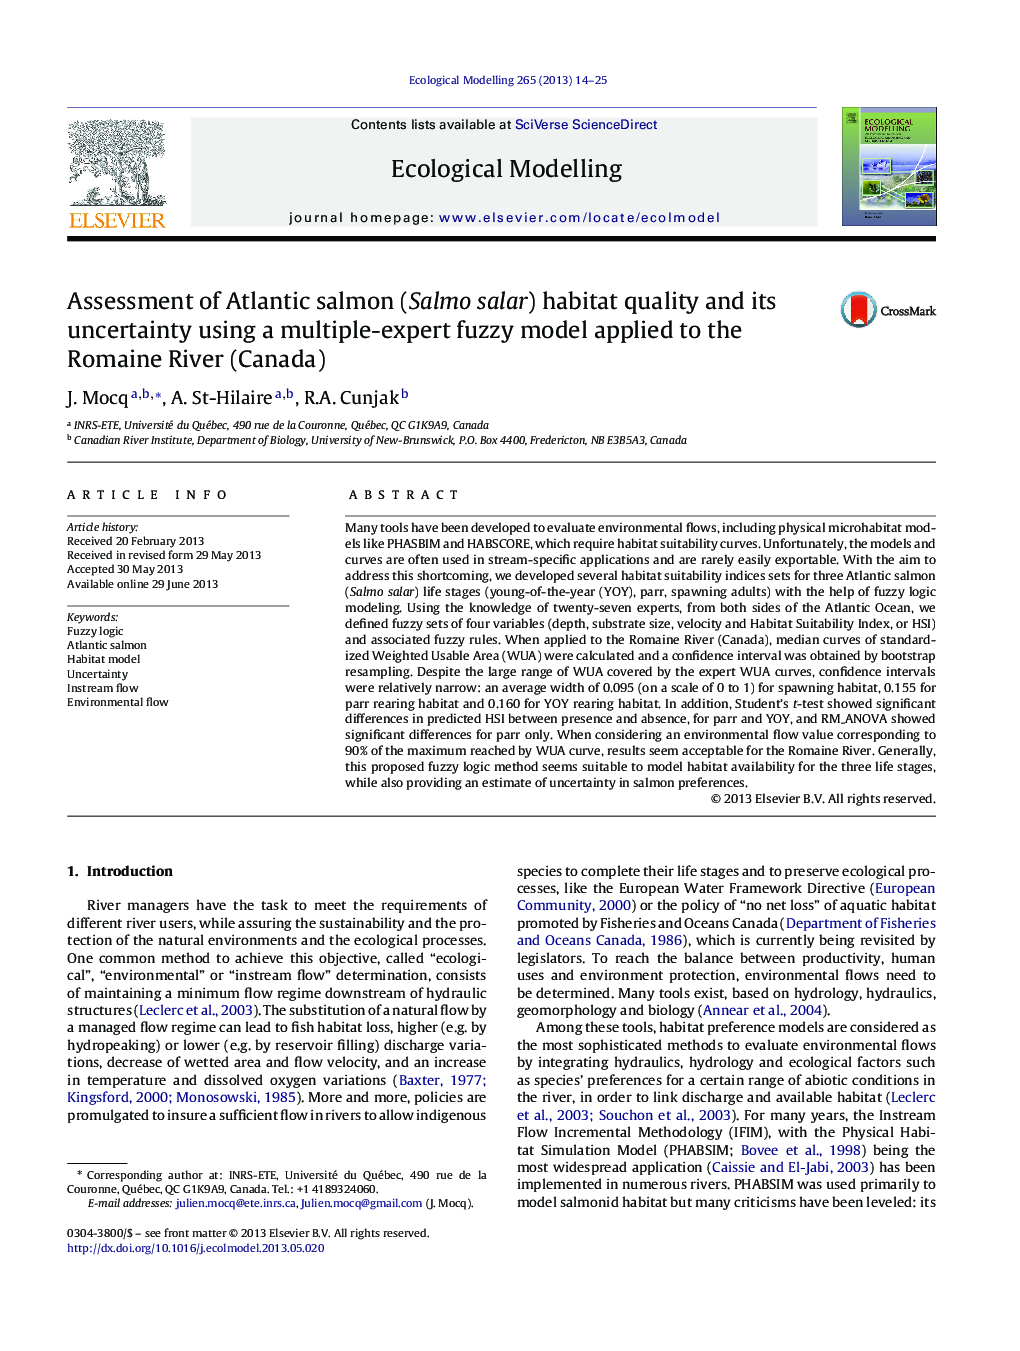 Assessment of Atlantic salmon (Salmo salar) habitat quality and its uncertainty using a multiple-expert fuzzy model applied to the Romaine River (Canada)